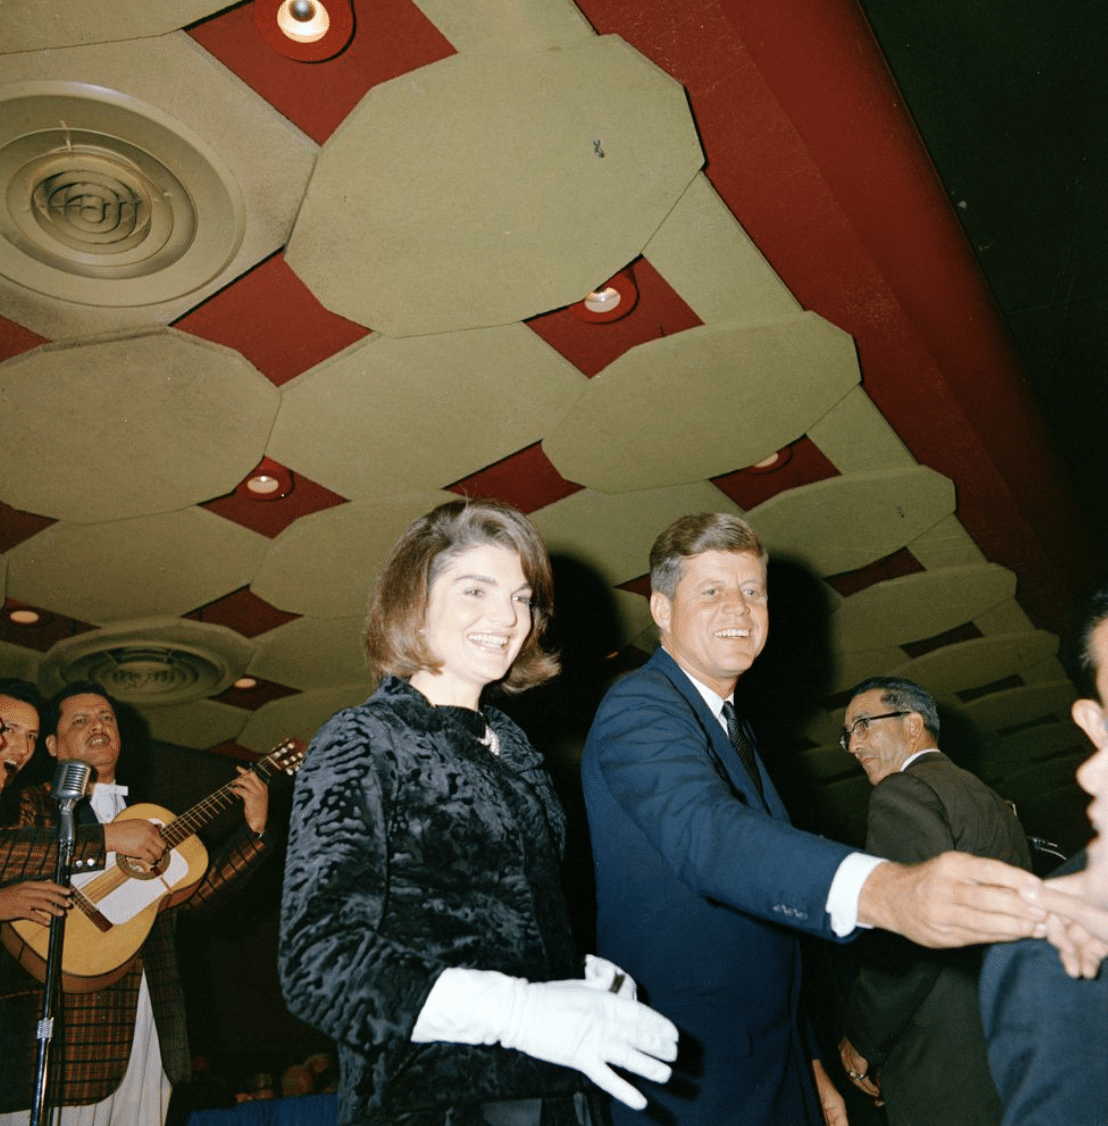 President and Mrs. Kennedy address the crowds at the League of United Latin American Citizens (LULAC).
Cecil Stoughton. White House Photographs. John F. Kennedy Presidential Library and Museum, Boston